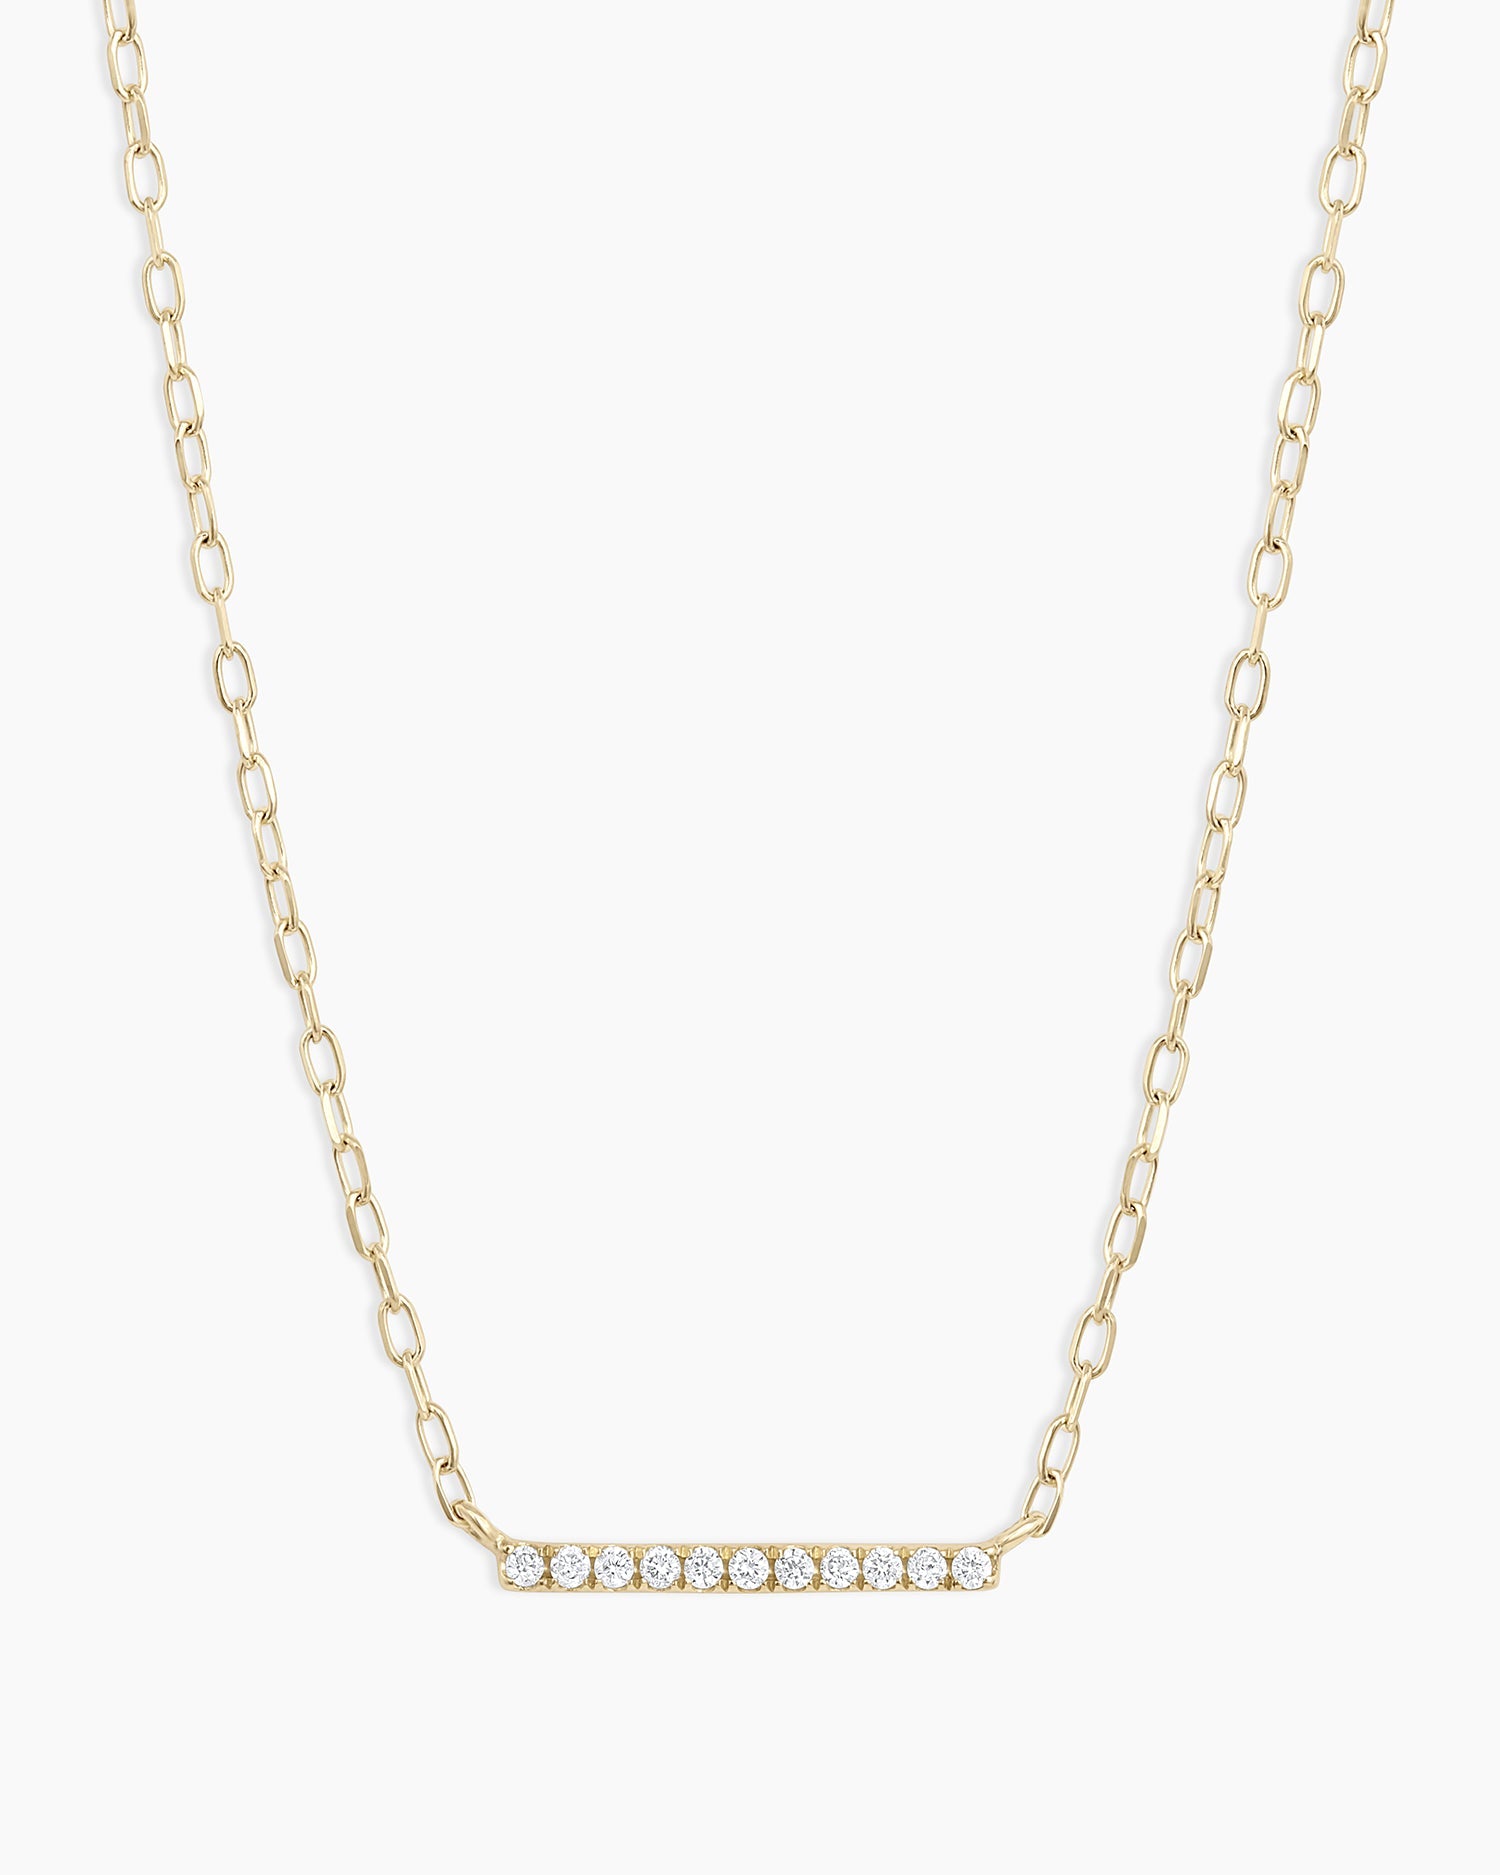 Classic Diamond Necklace in 14K Solid Gold, Women's by Gorjana